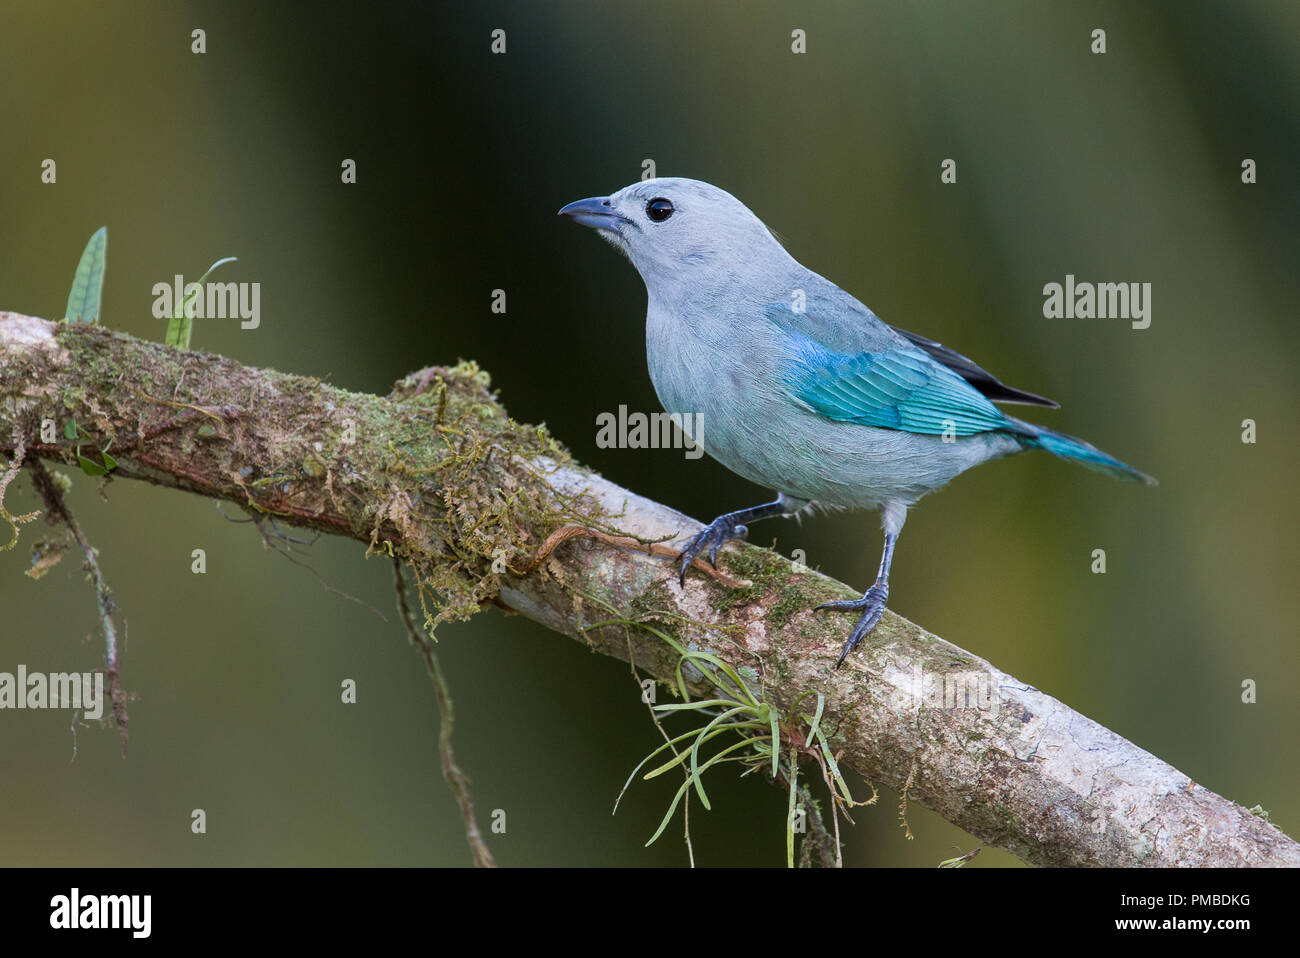 A blue and grey tanager photographed in Costa Rica Stock Photo